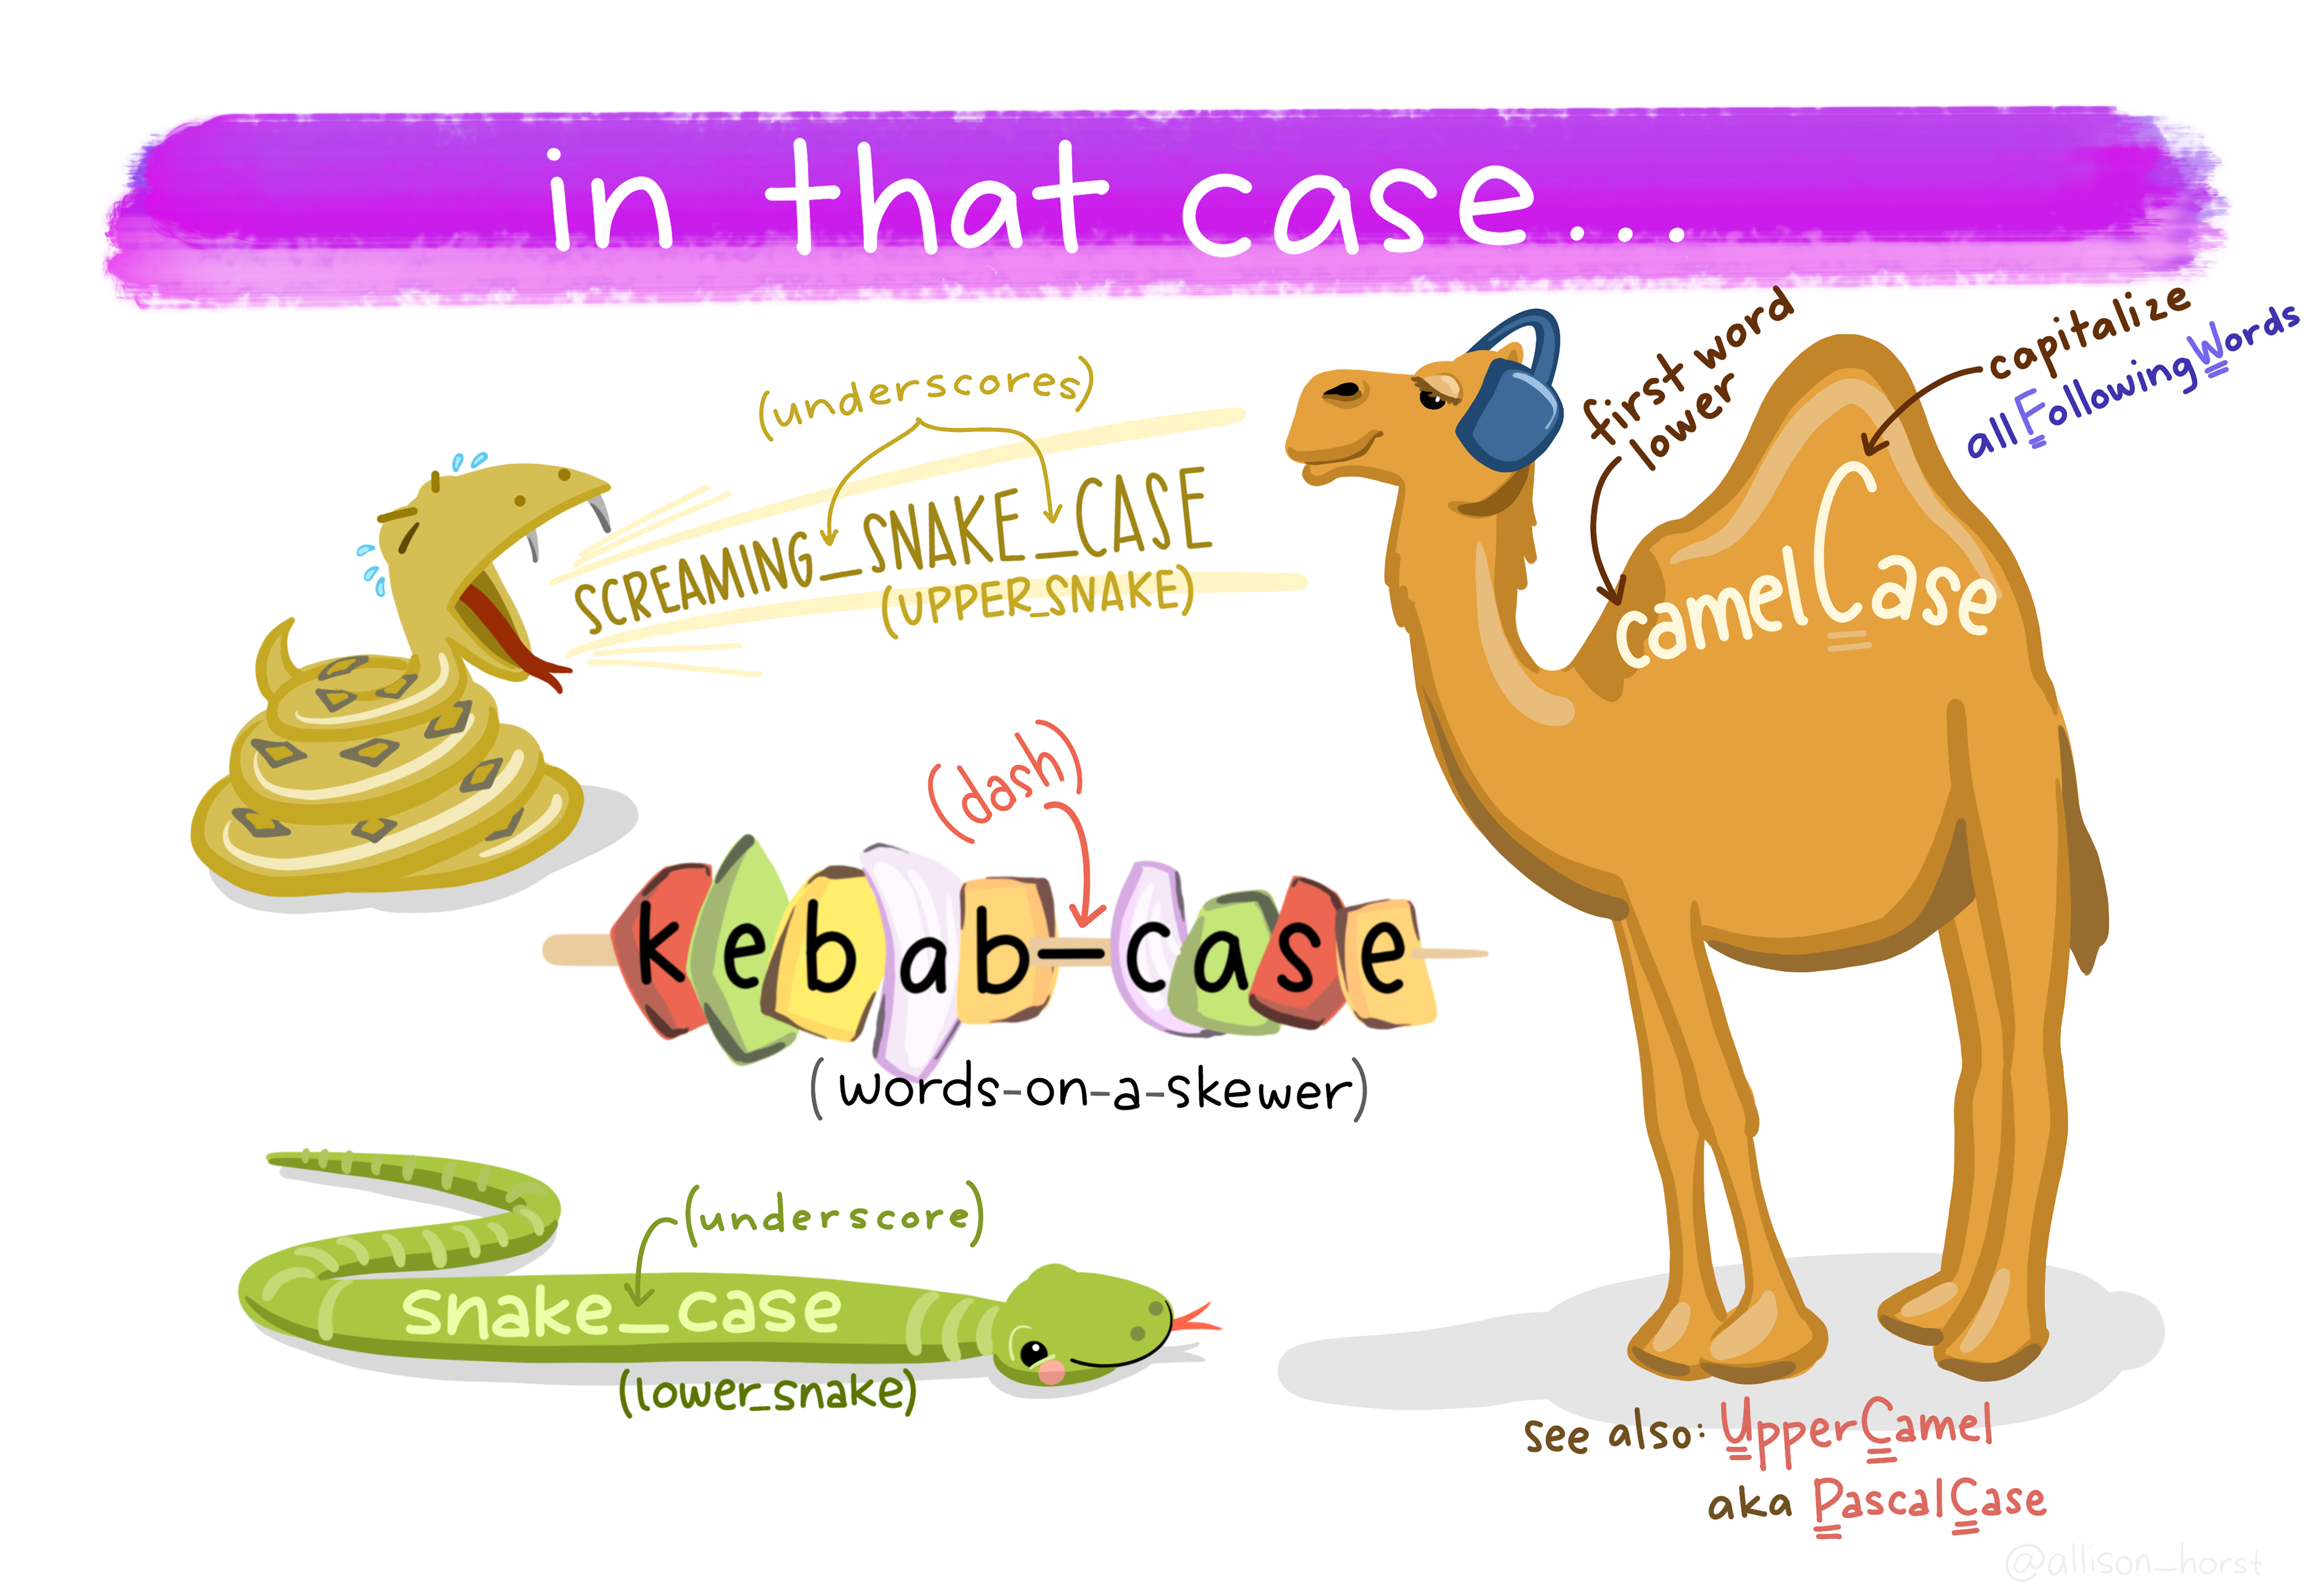 Cartoon representations of common cases in coding. A snake screams 'SCREAMING_SNAKE_CASE' into the face of a camel (wearing ear muffs) with 'camelCase' written along its back. Vegetables on a skewer spell out 'kebab-case' (words on a skewer). A mellow, happy looking snake has text 'snake_case' along it.